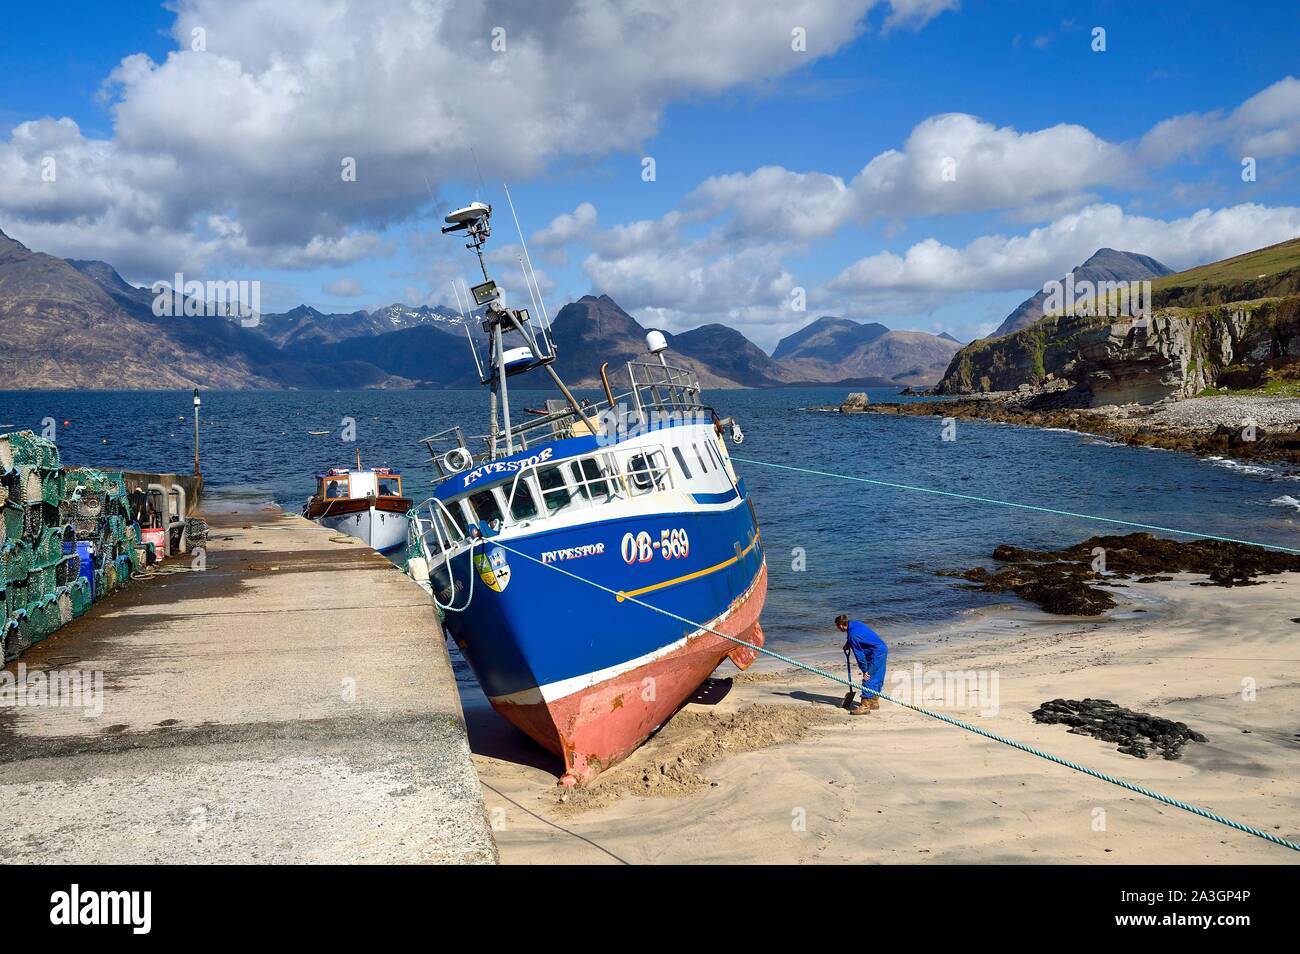 United Kingdom, Scotland, Highlands, Hebrides, Isle of Skye, fishing boat in the small port of the Elgol village on the shores of Loch Scavaig towards the end of the Strathaird peninsula and the Black Cuillin Mountains in the background Stock Photo